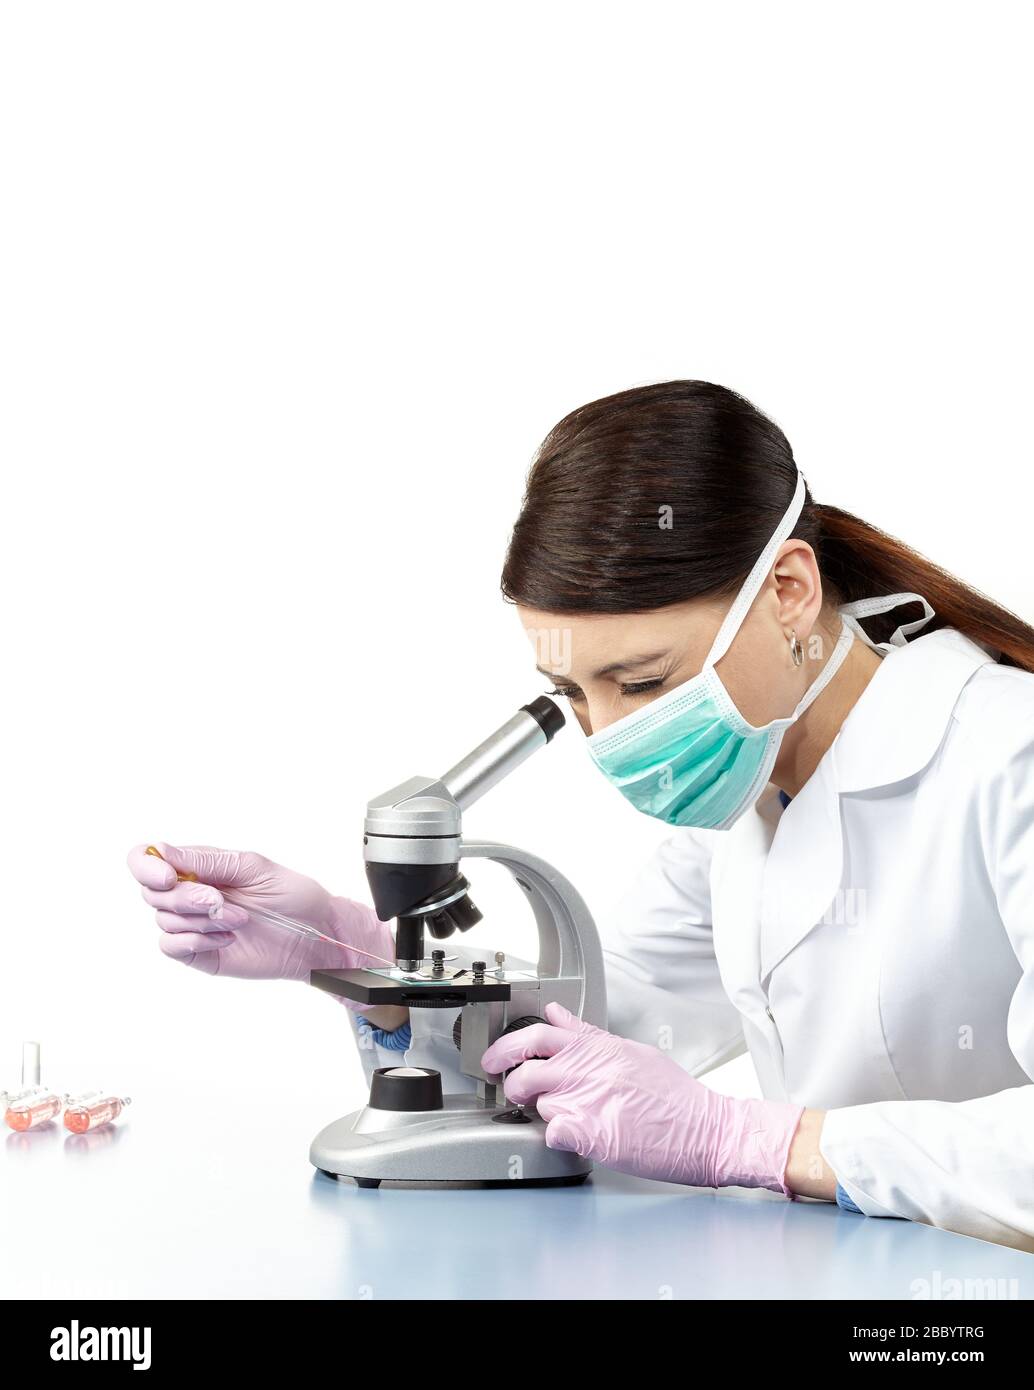 Woman wearing safety gloves and mask doing research with microscope in a laboratory, isolated on white. Stock Photo